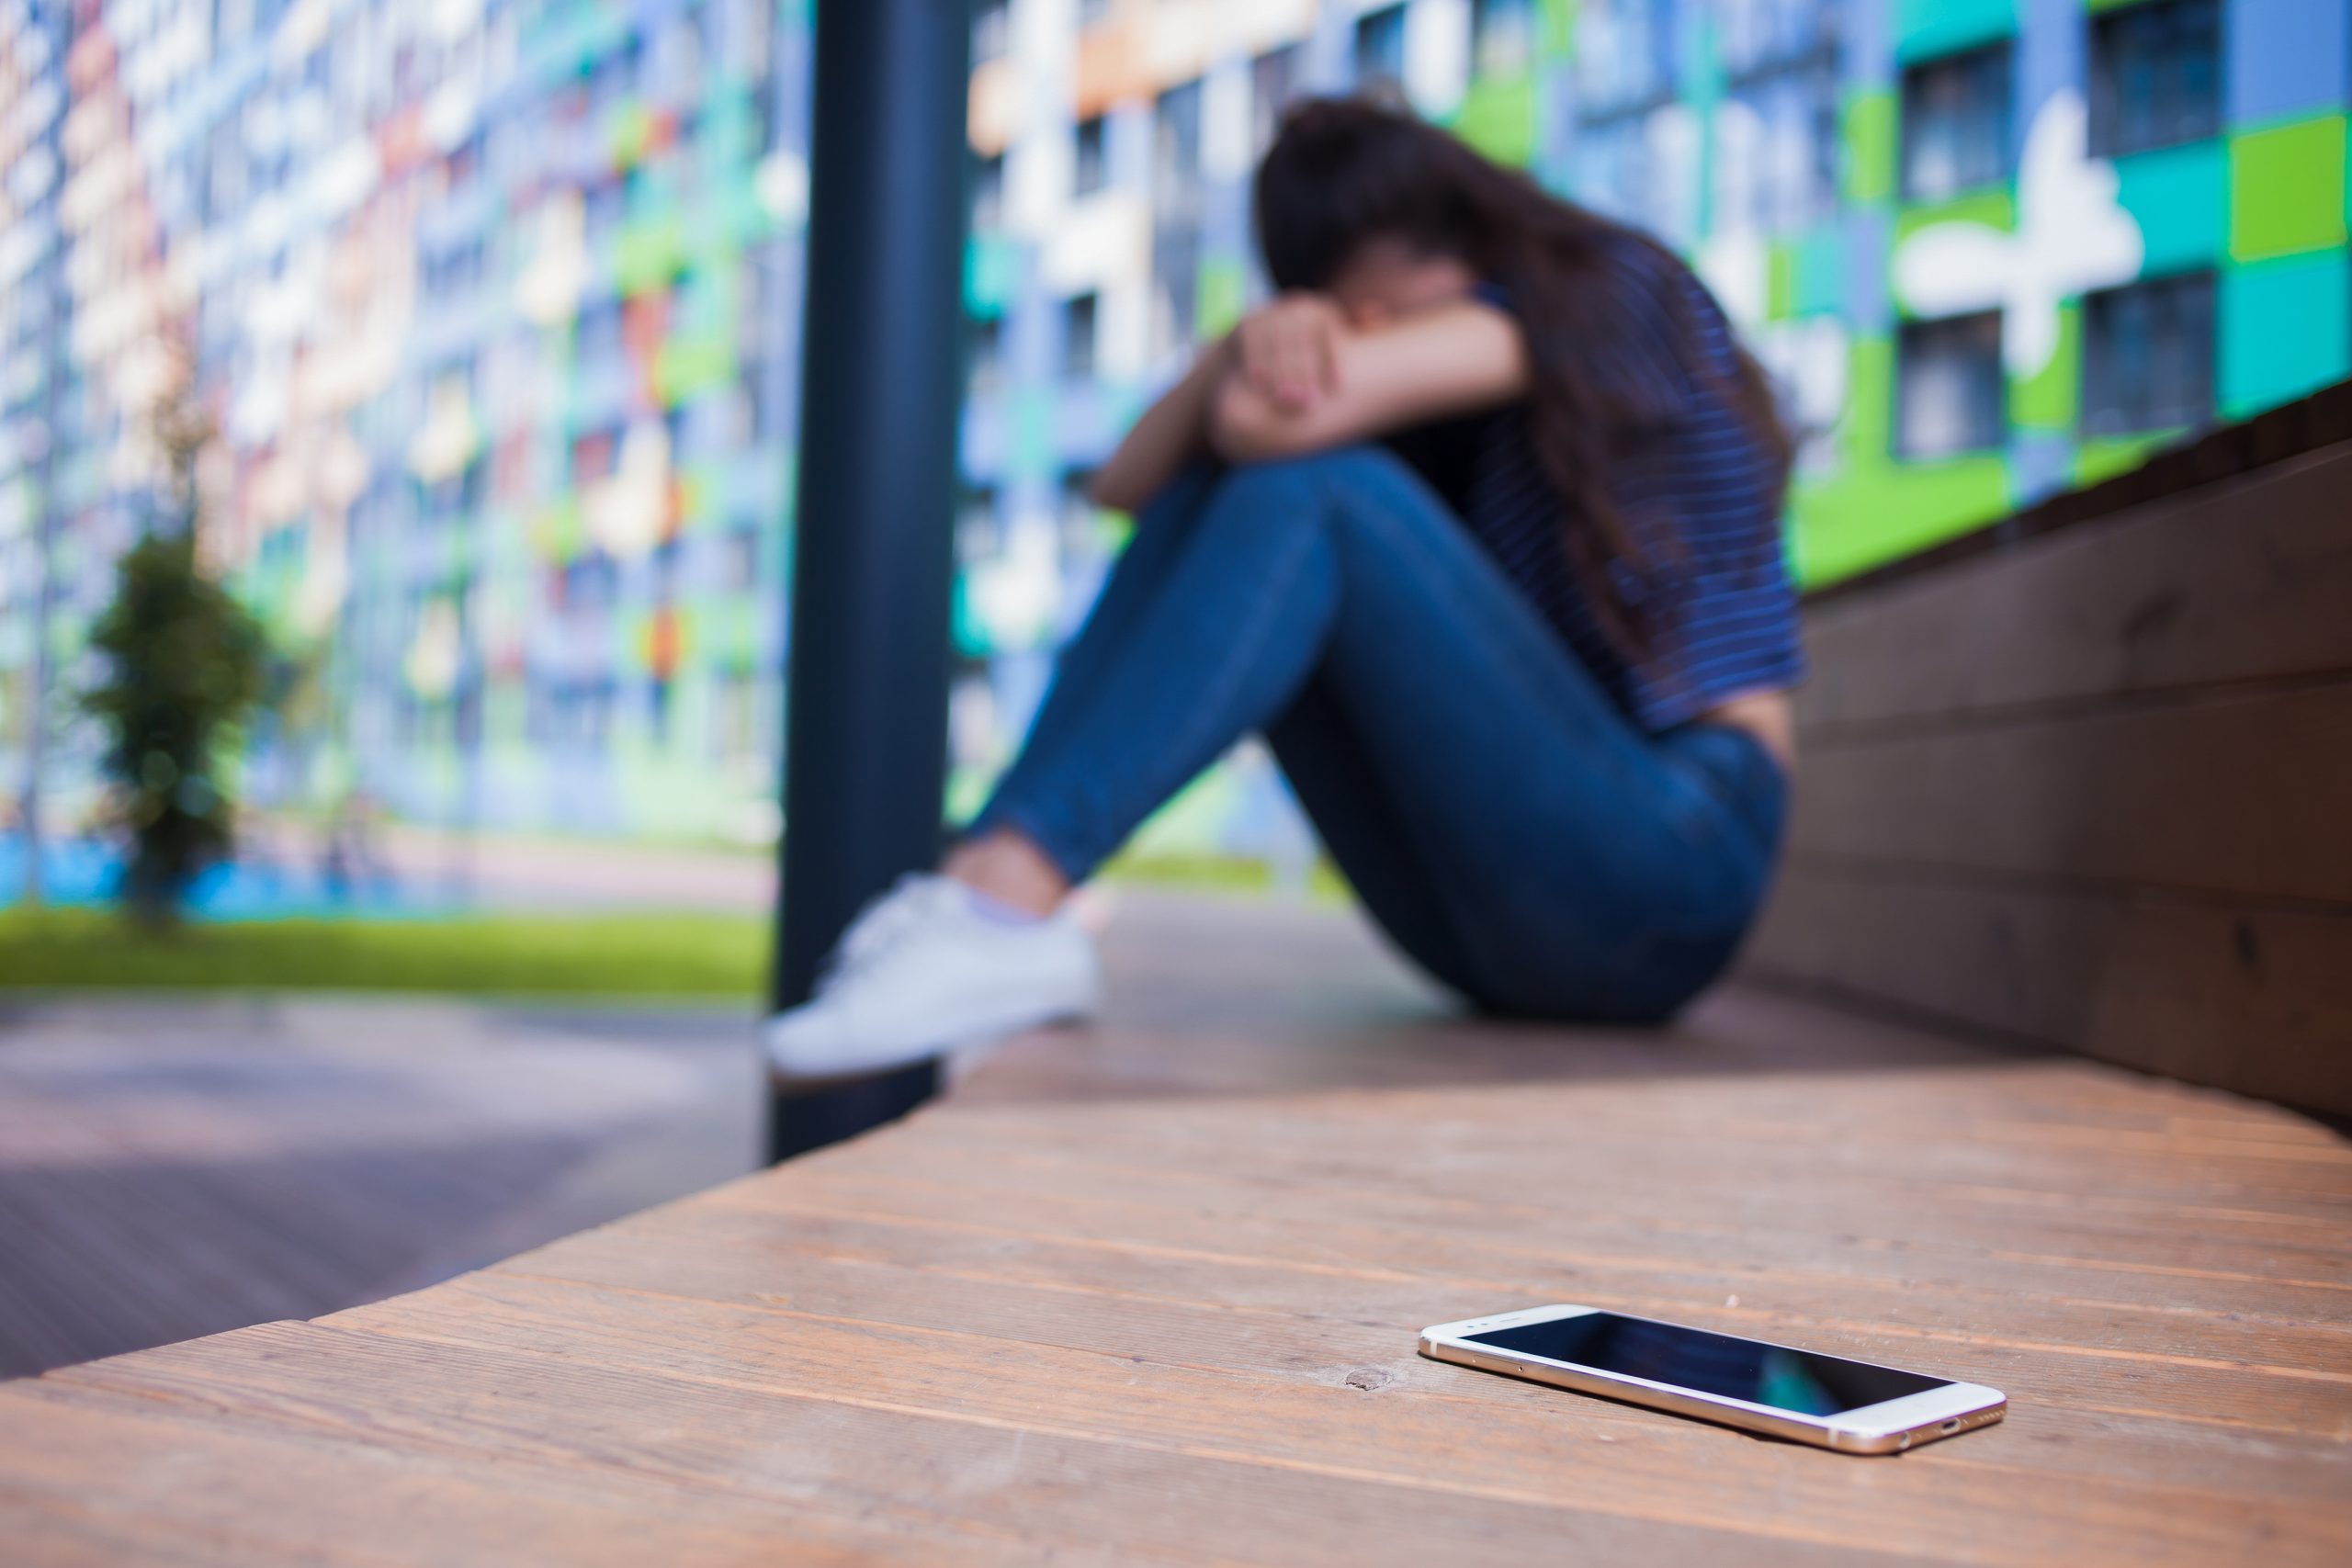 Smartphone lying in the foreground, on blurred background, girl, hiding face in her knees, sitting on a wooden bench.